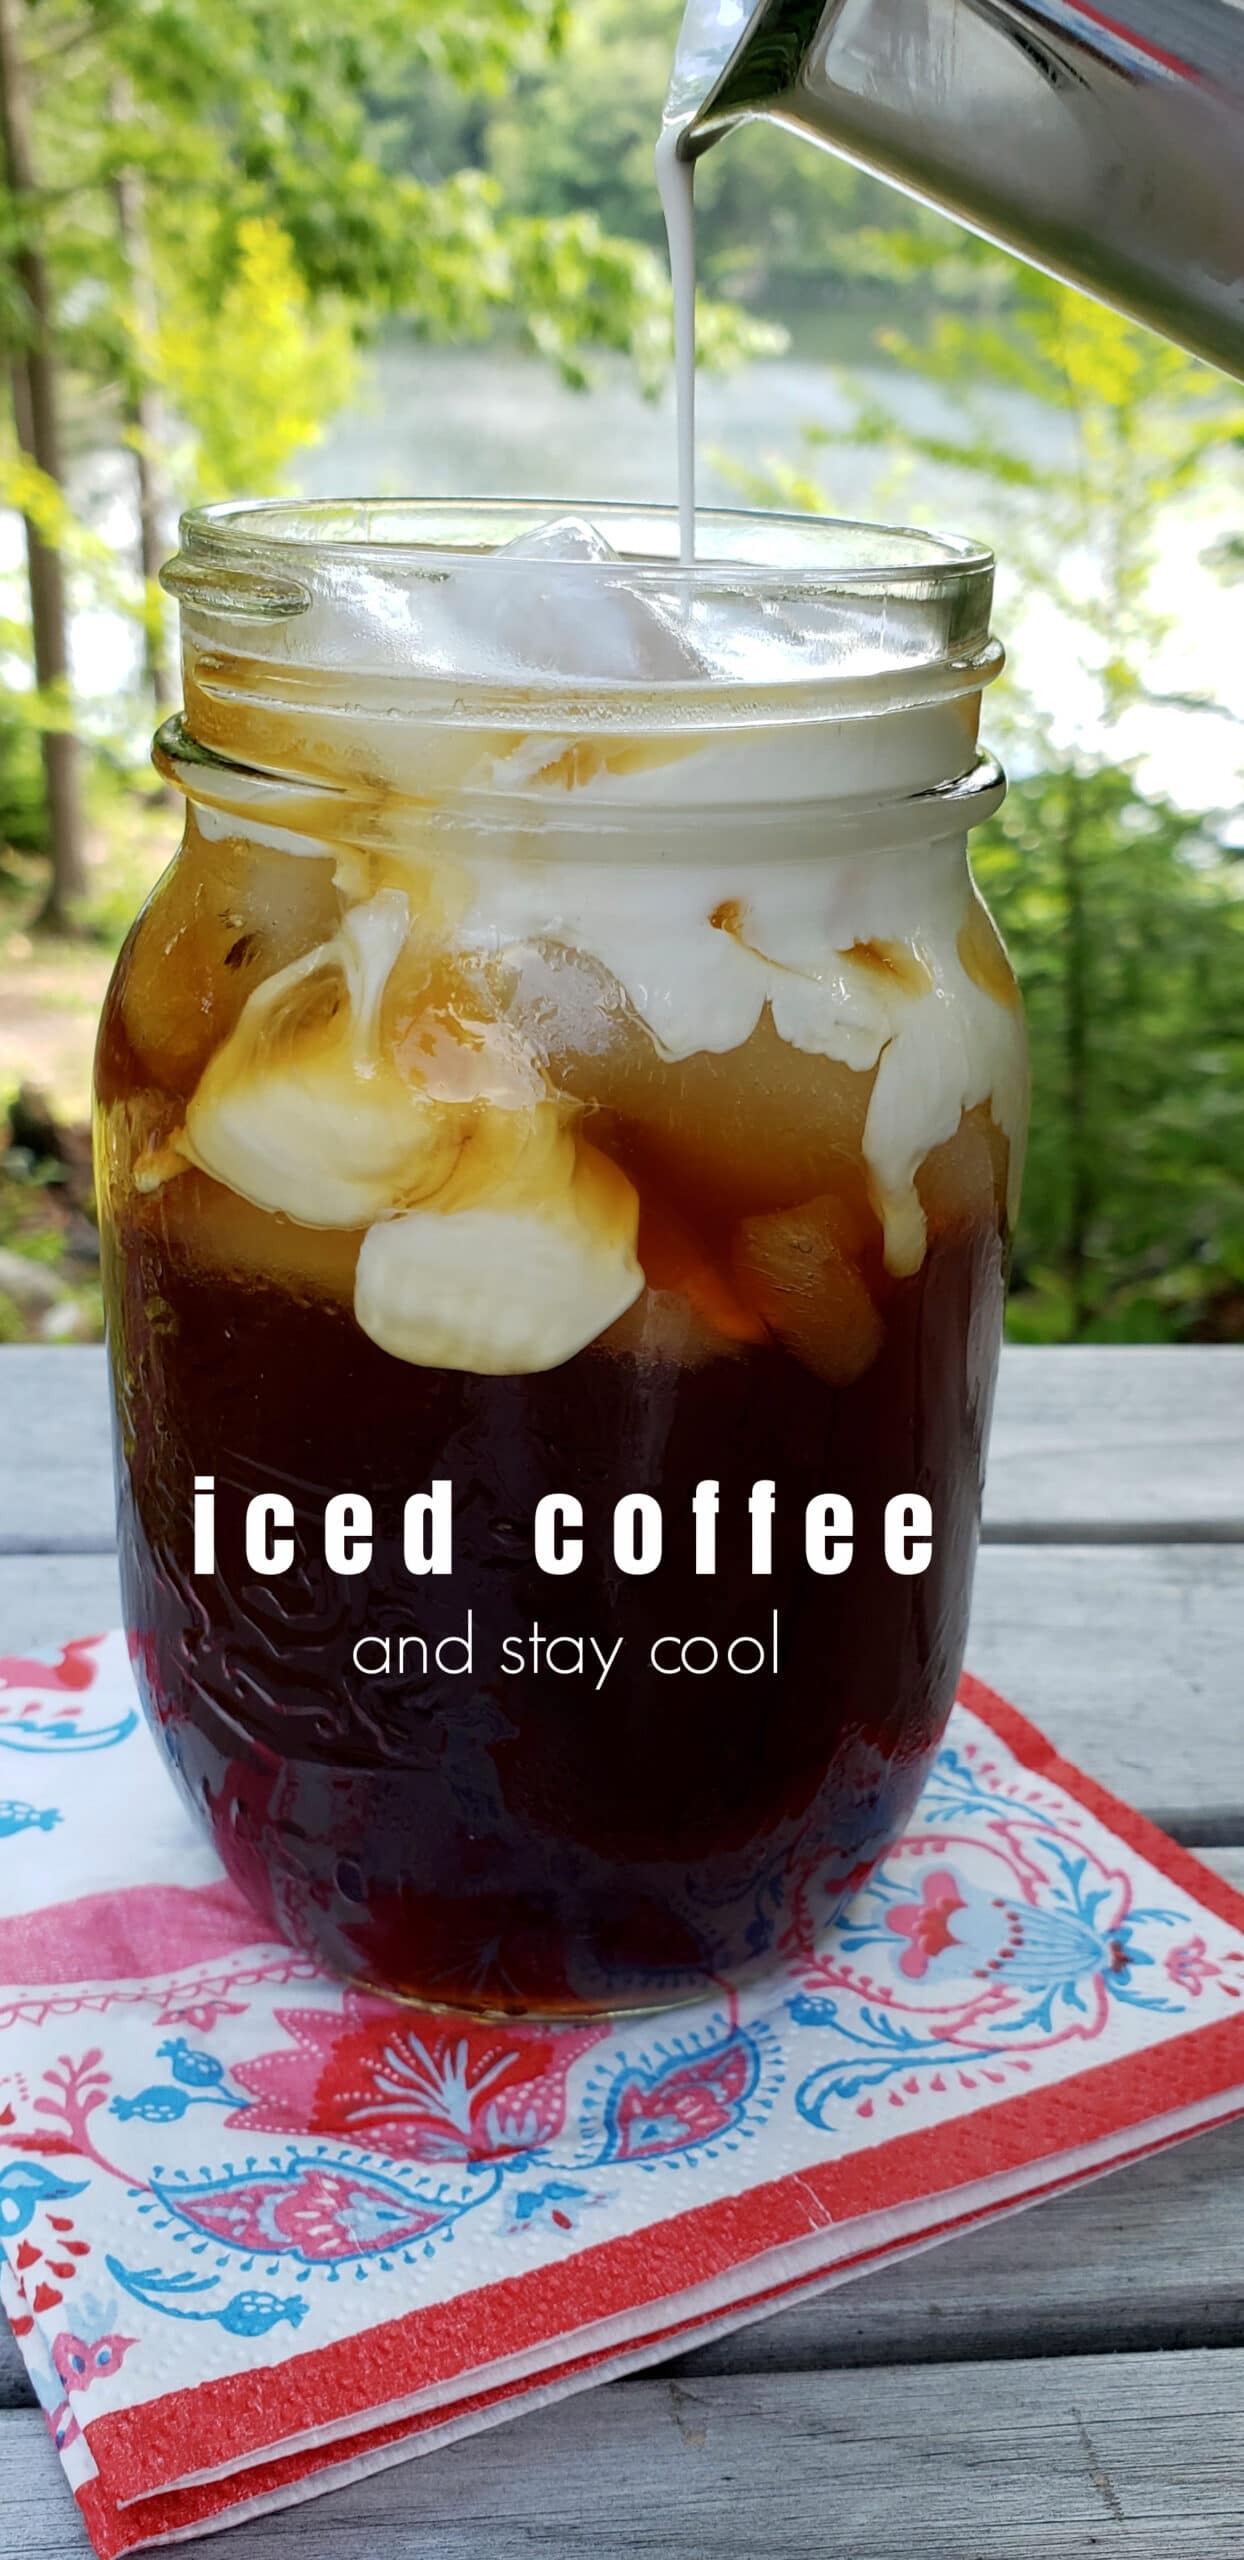 https://theculinarychase.com/wp-content/uploads/2020/07/iced-coffee-scaled.jpg